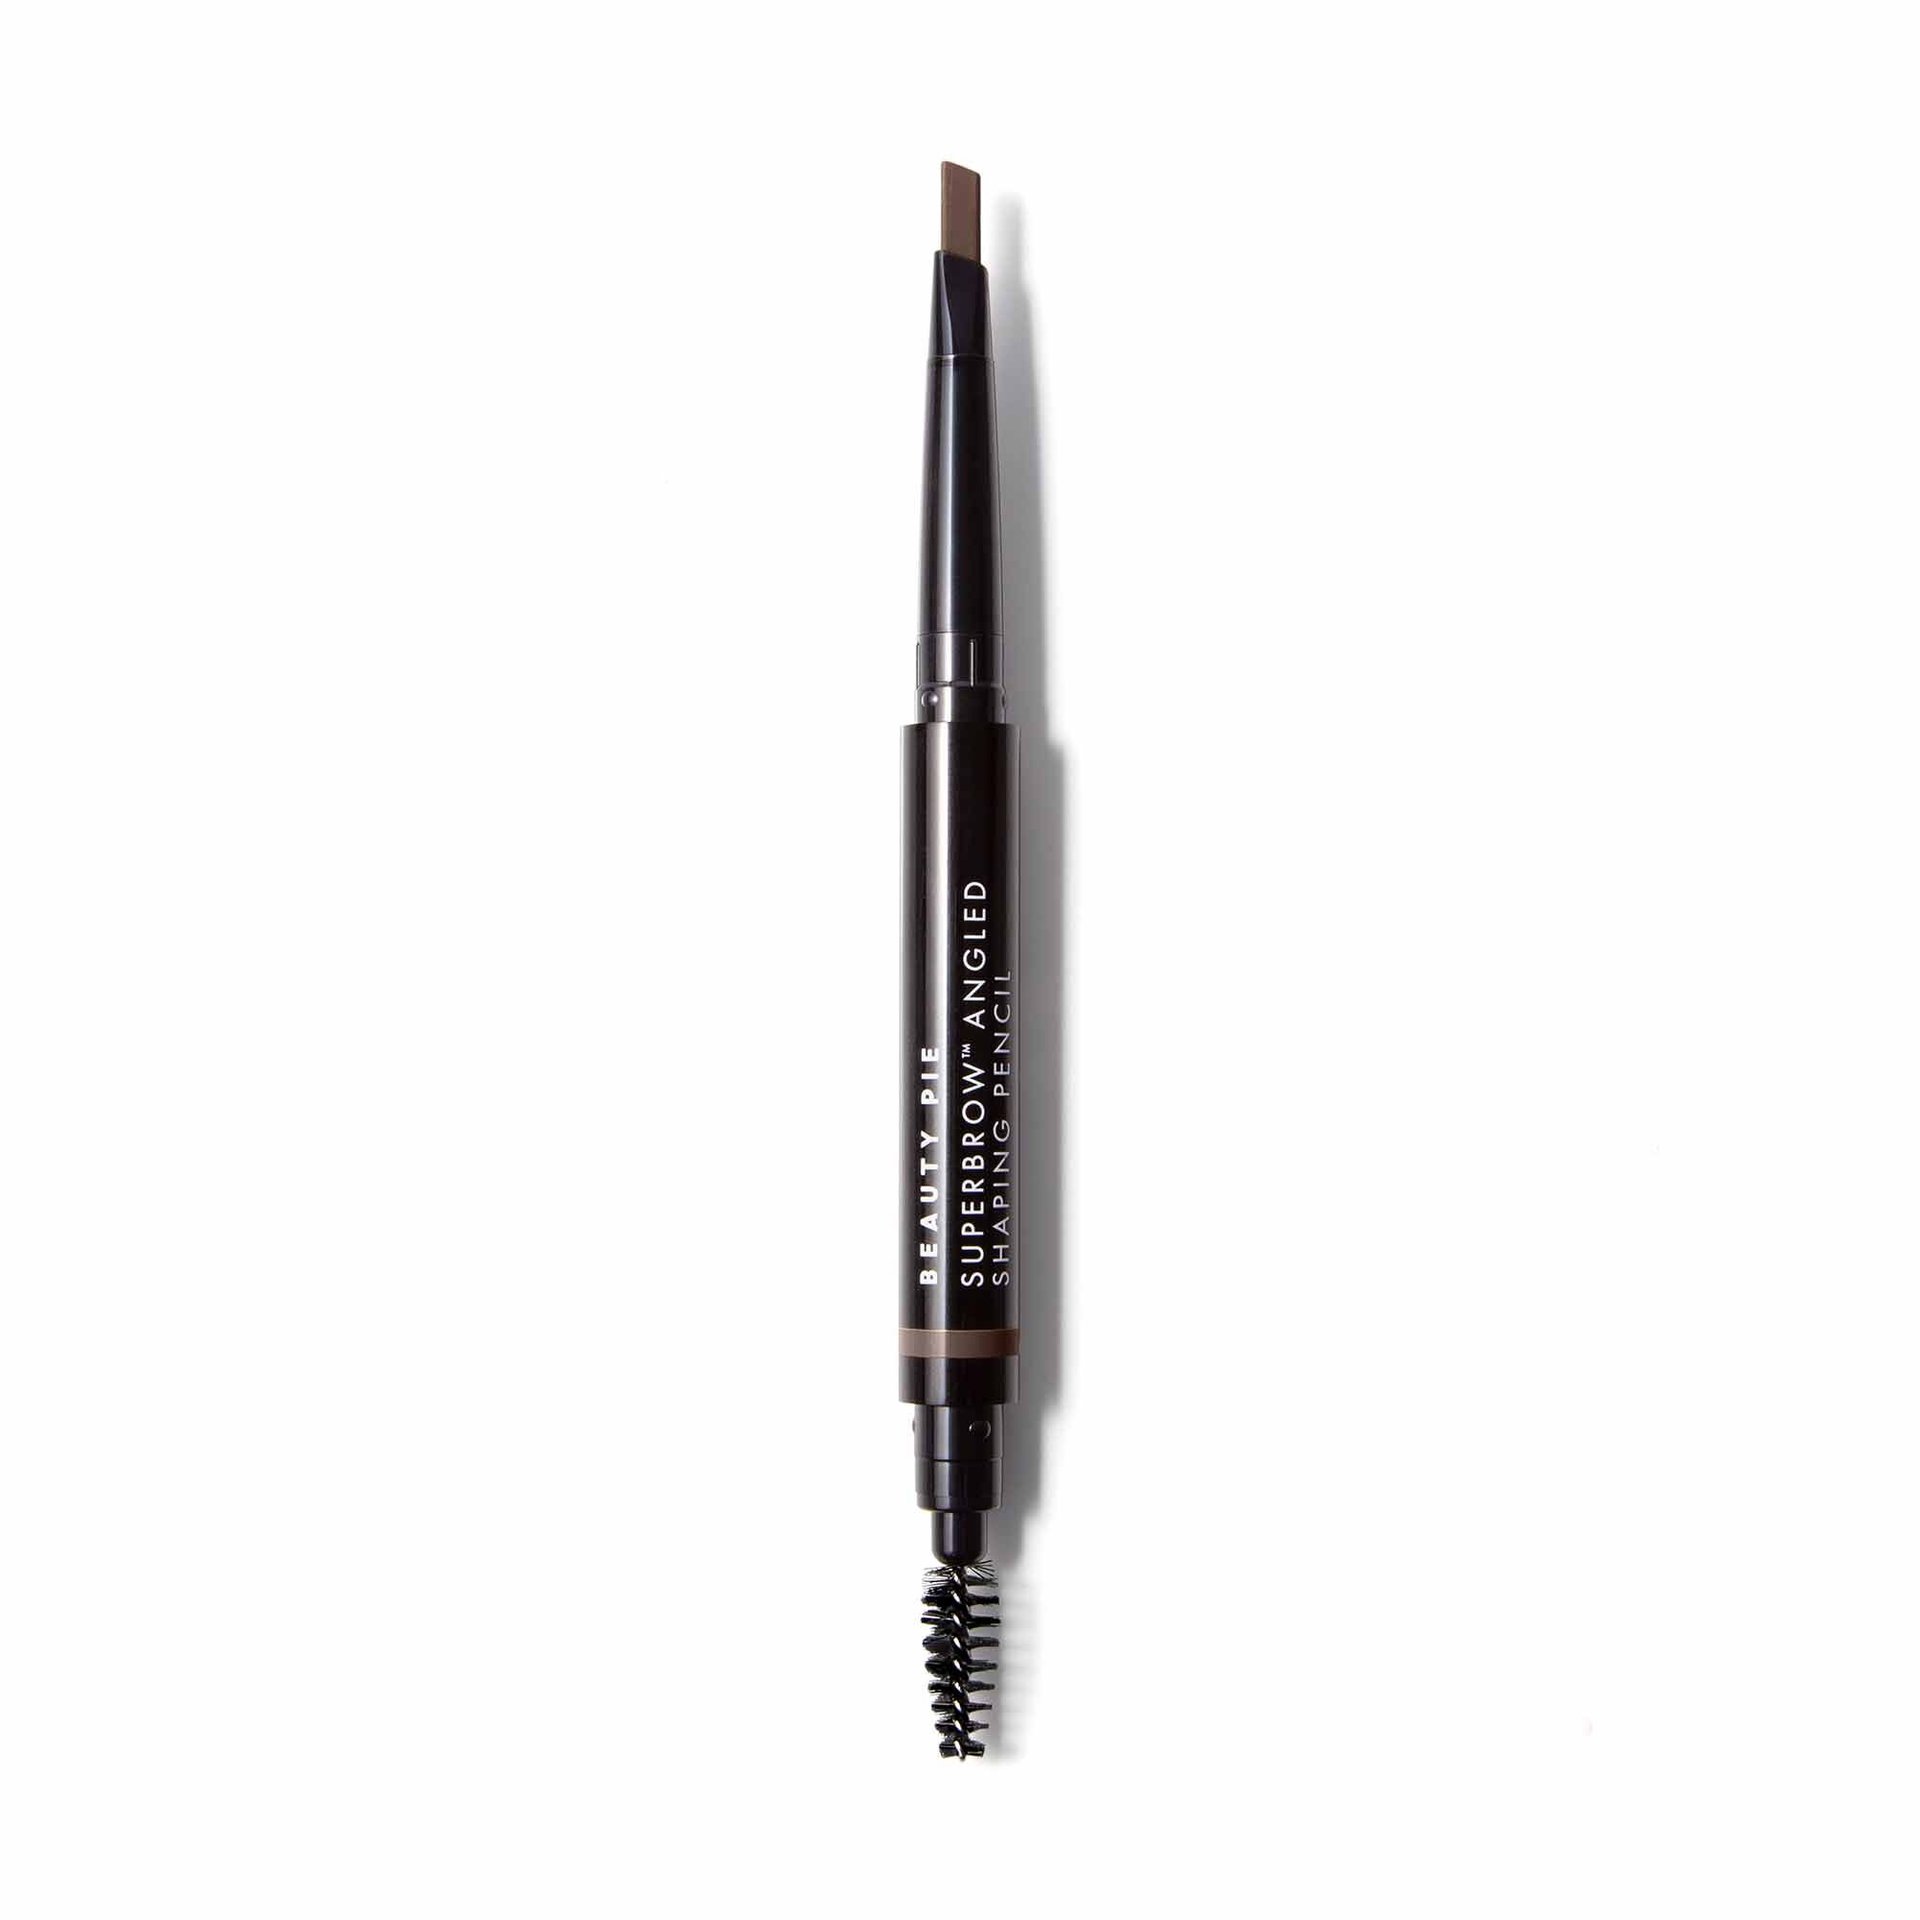 Superbrow™ Angled Shaping Pencil